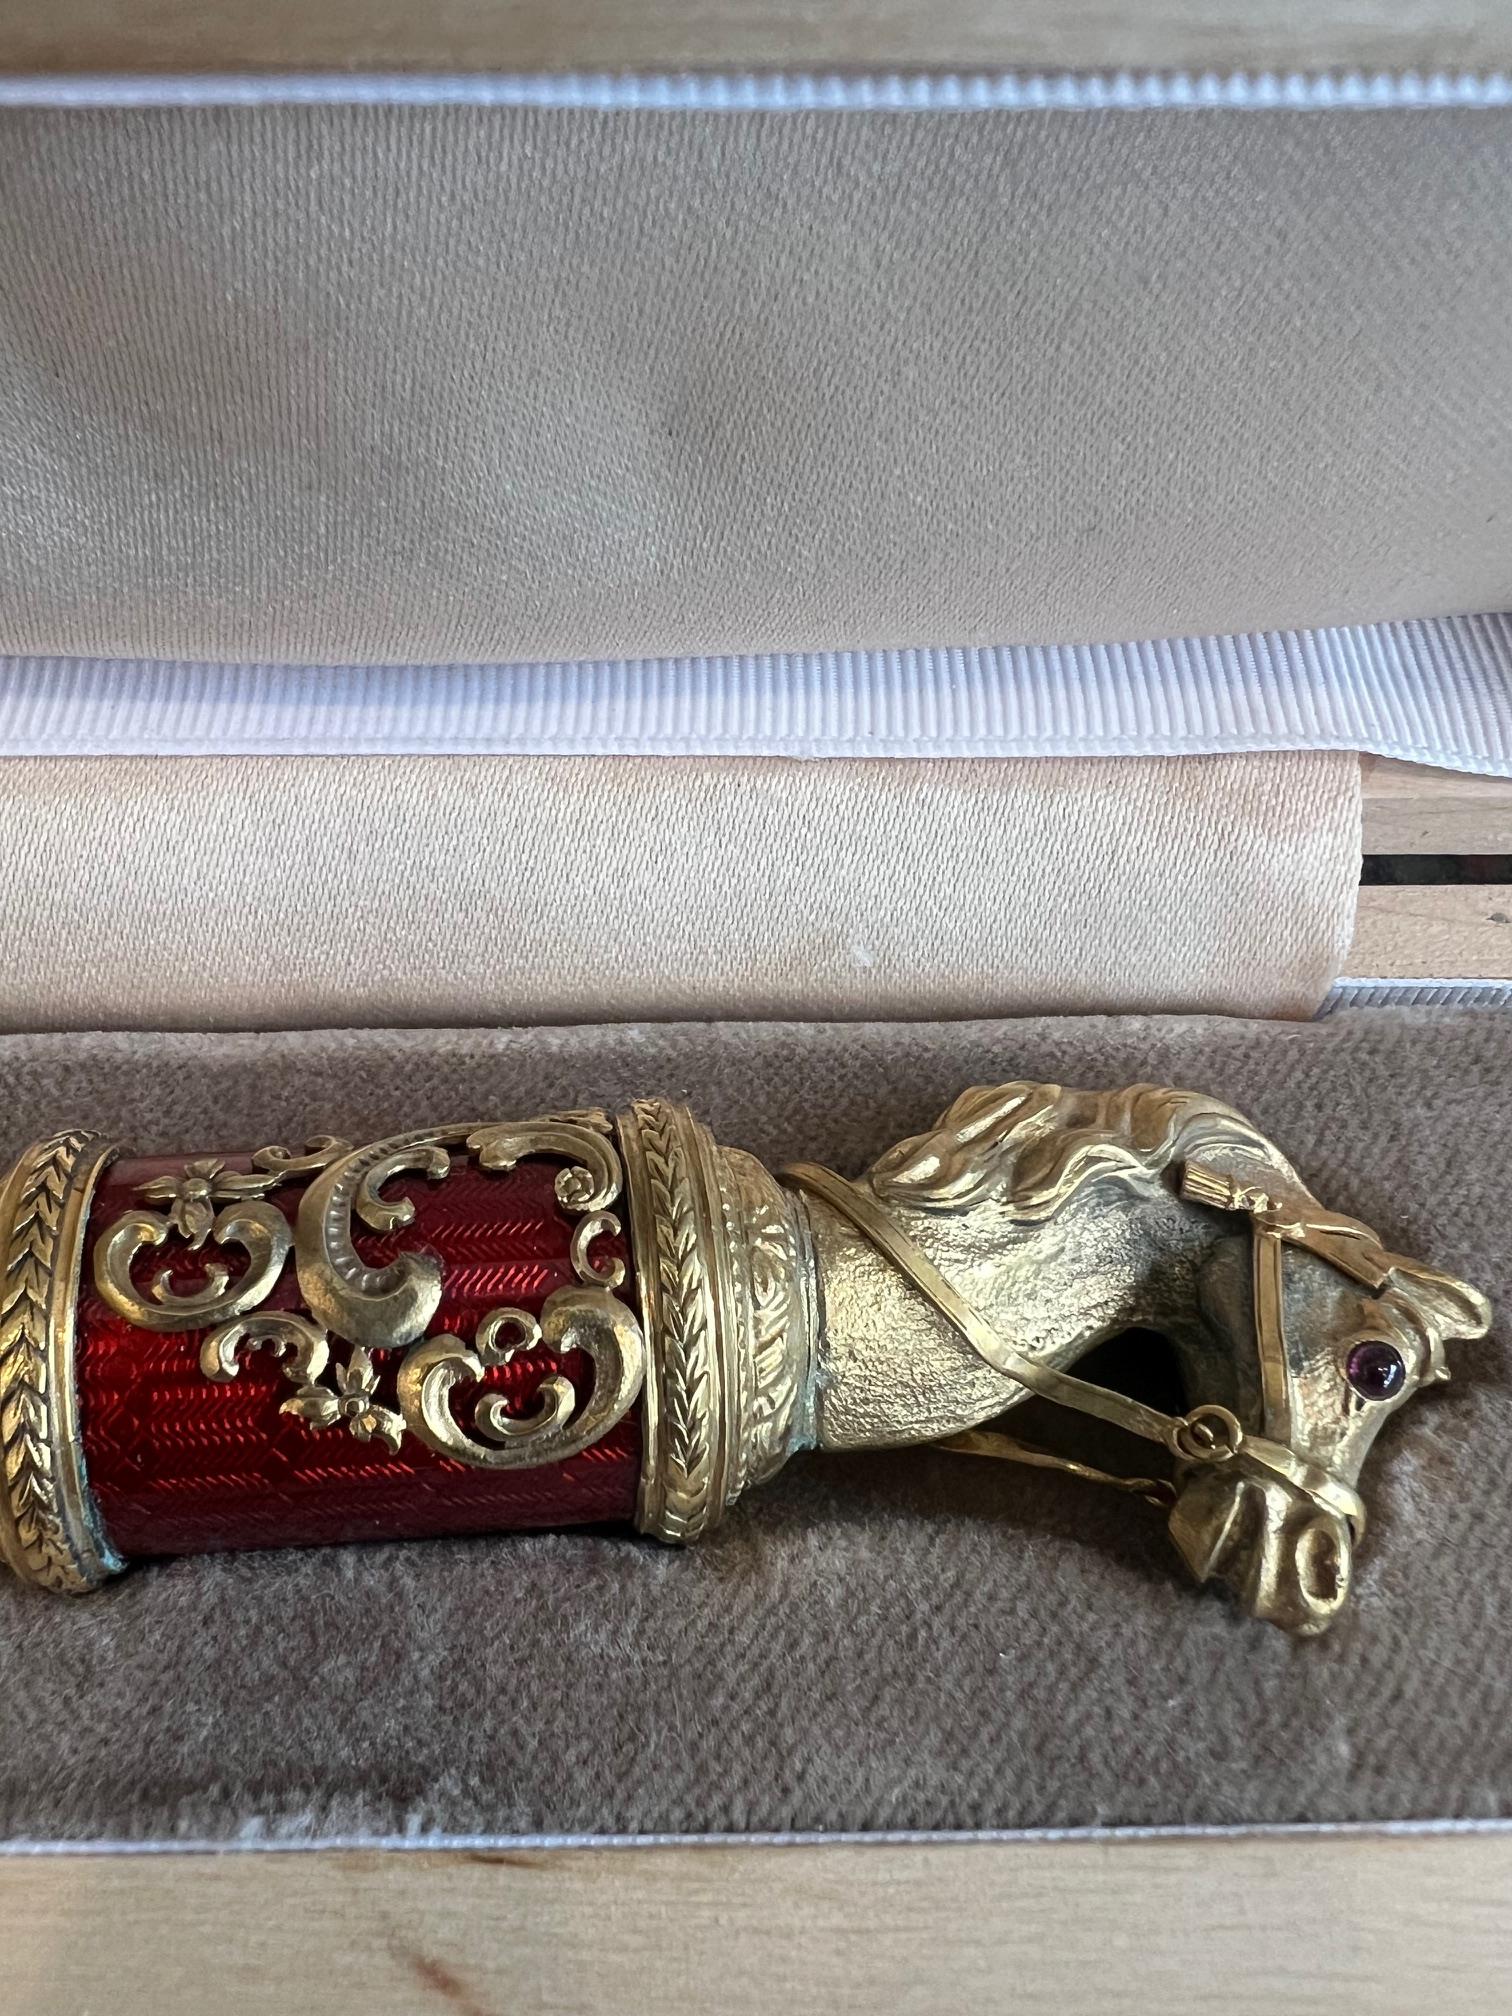 A FABERGE STYLE SILVER GILT, DIAMOND SET AND ENAMELLED LETTER KNIFE - Image 5 of 5